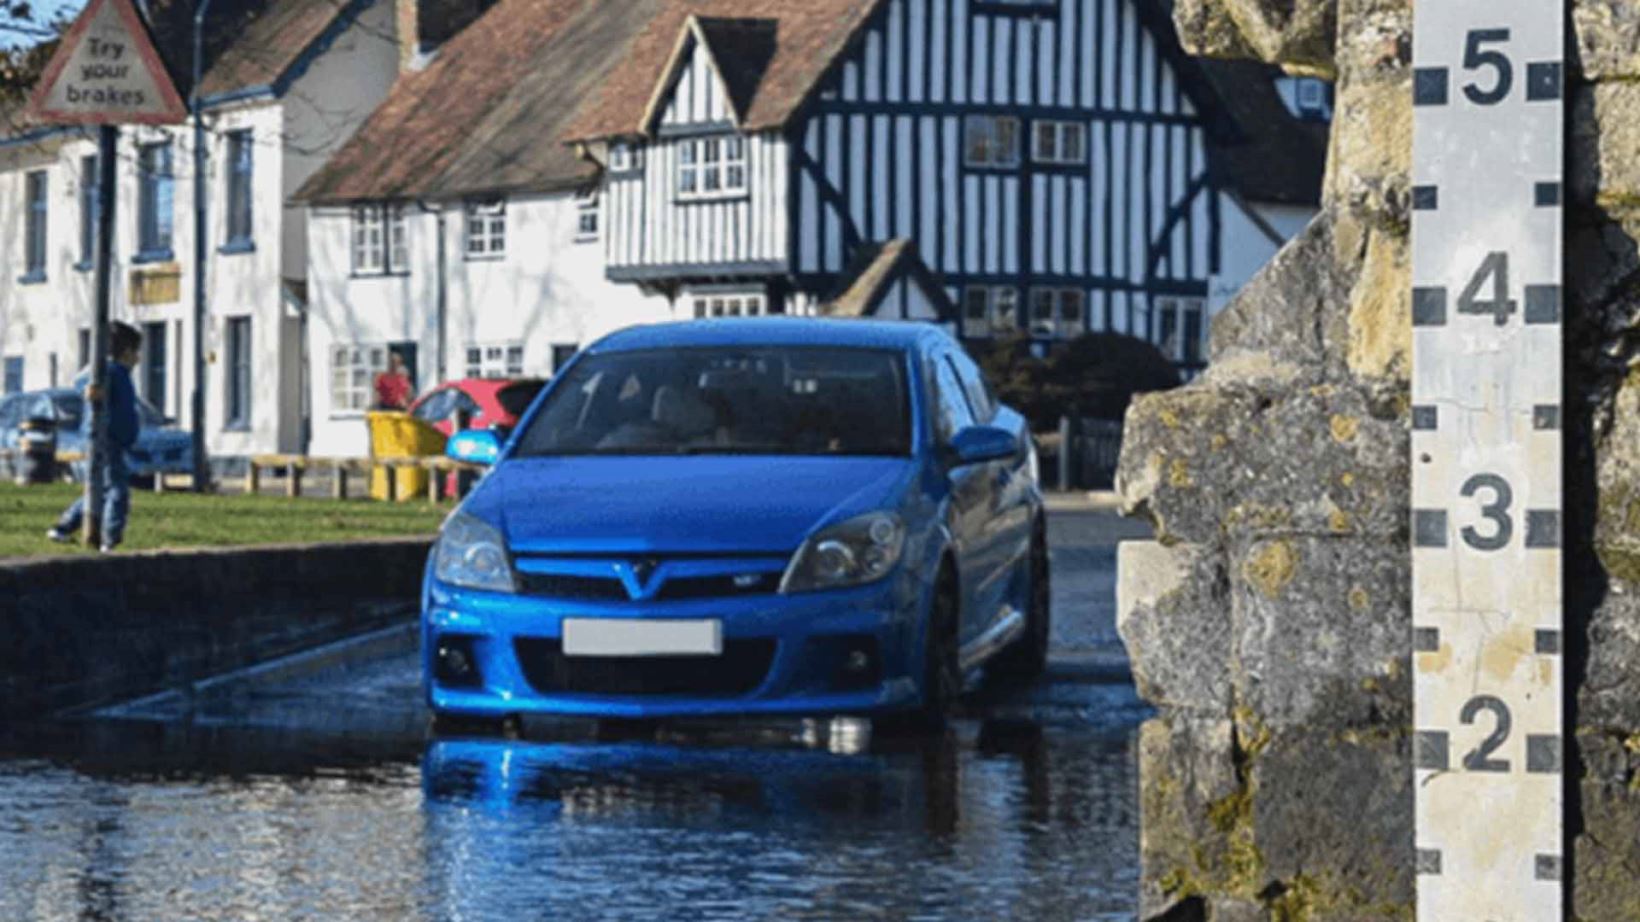 modified-car-of-the-year-emilys-vauxhall-astra-h-vxr-feature